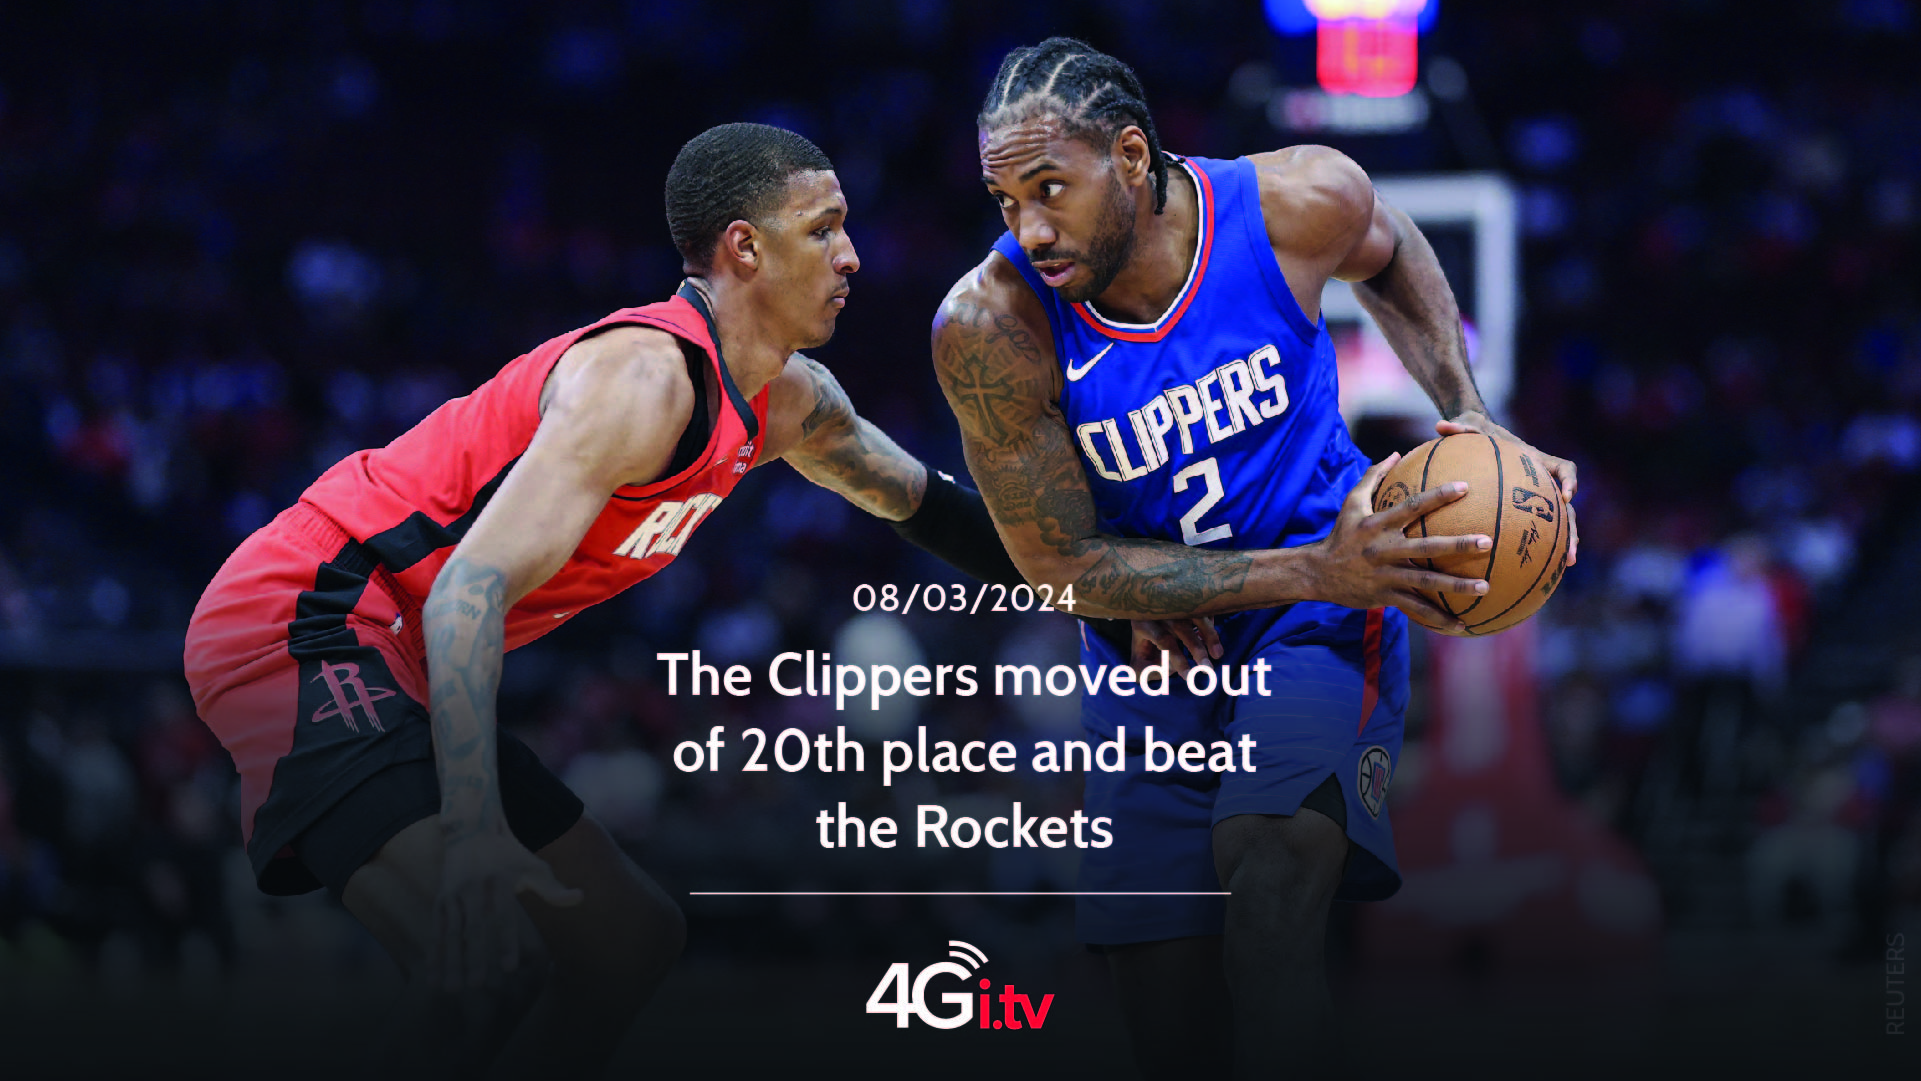 Lesen Sie mehr über den Artikel The Clippers moved out of 20th place and beat the Rockets 